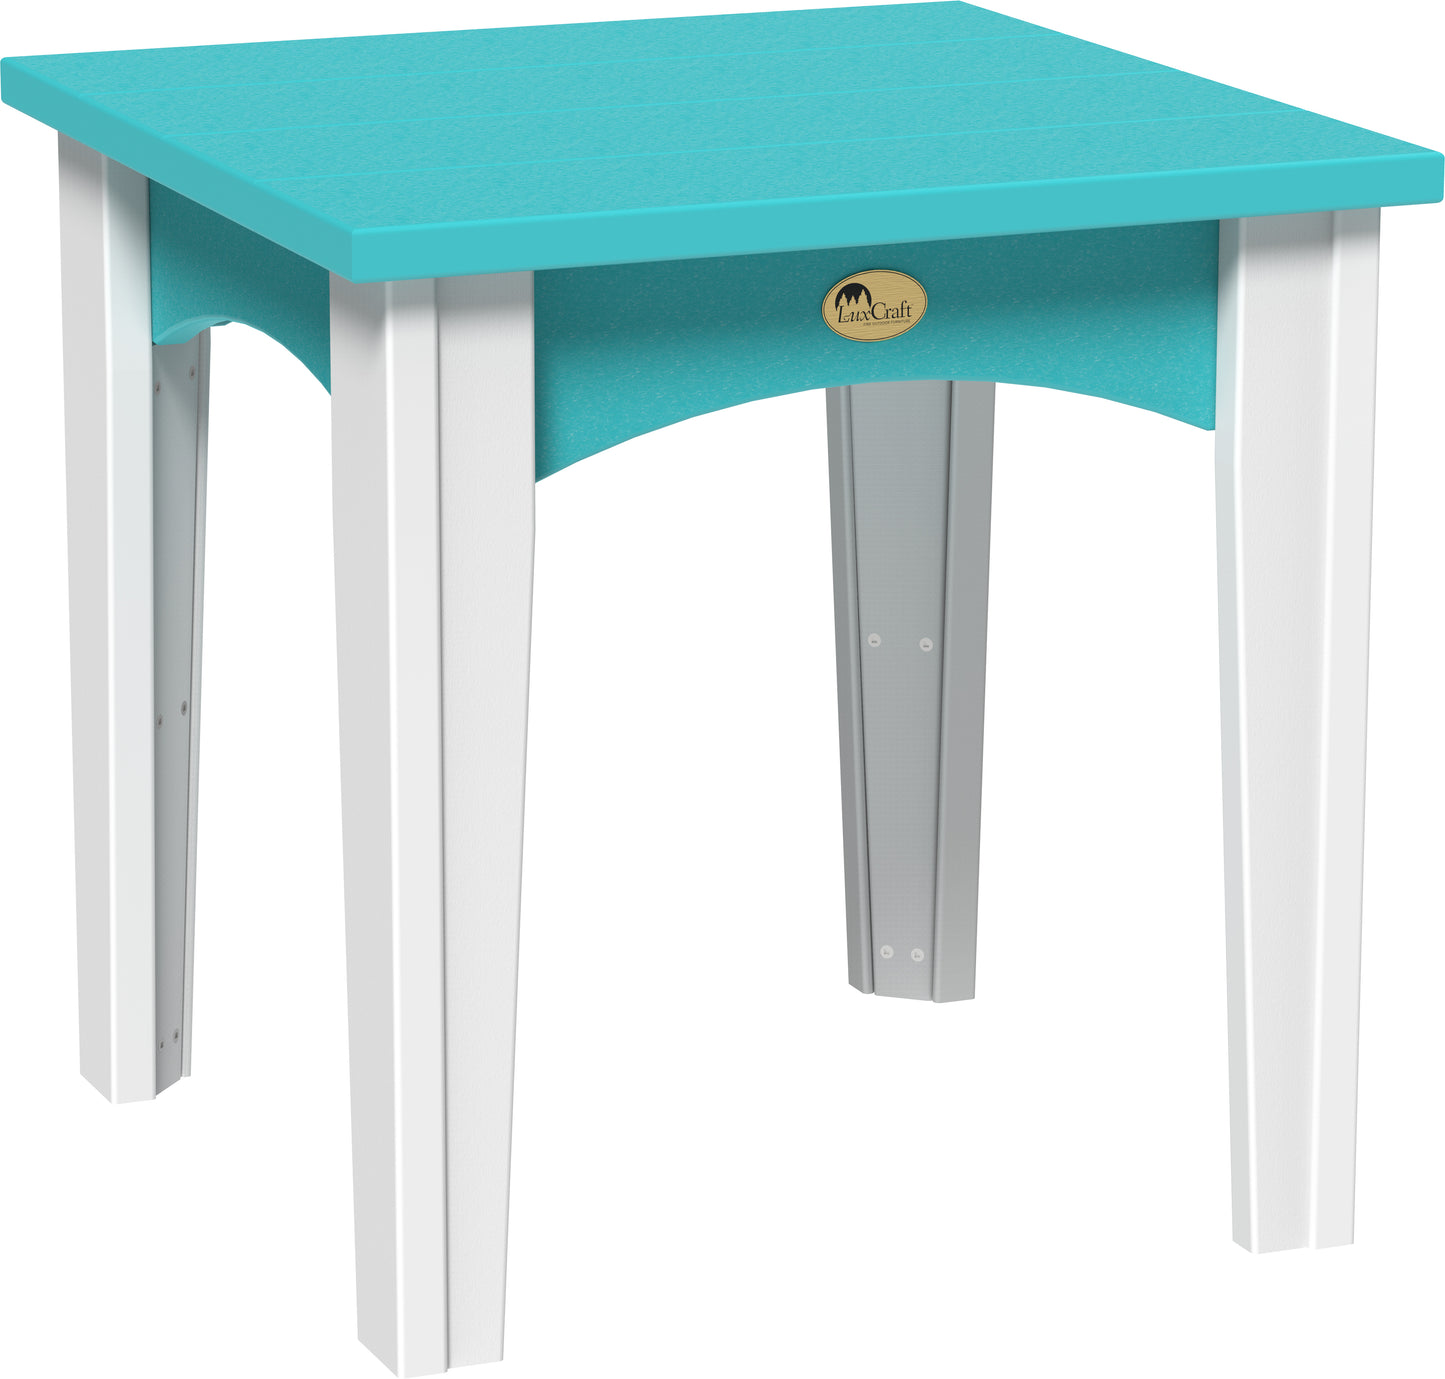 LuxCraft Recycled Plastic Island End Table - LEAD TIME TO SHIP 3 TO 4 WEEKS